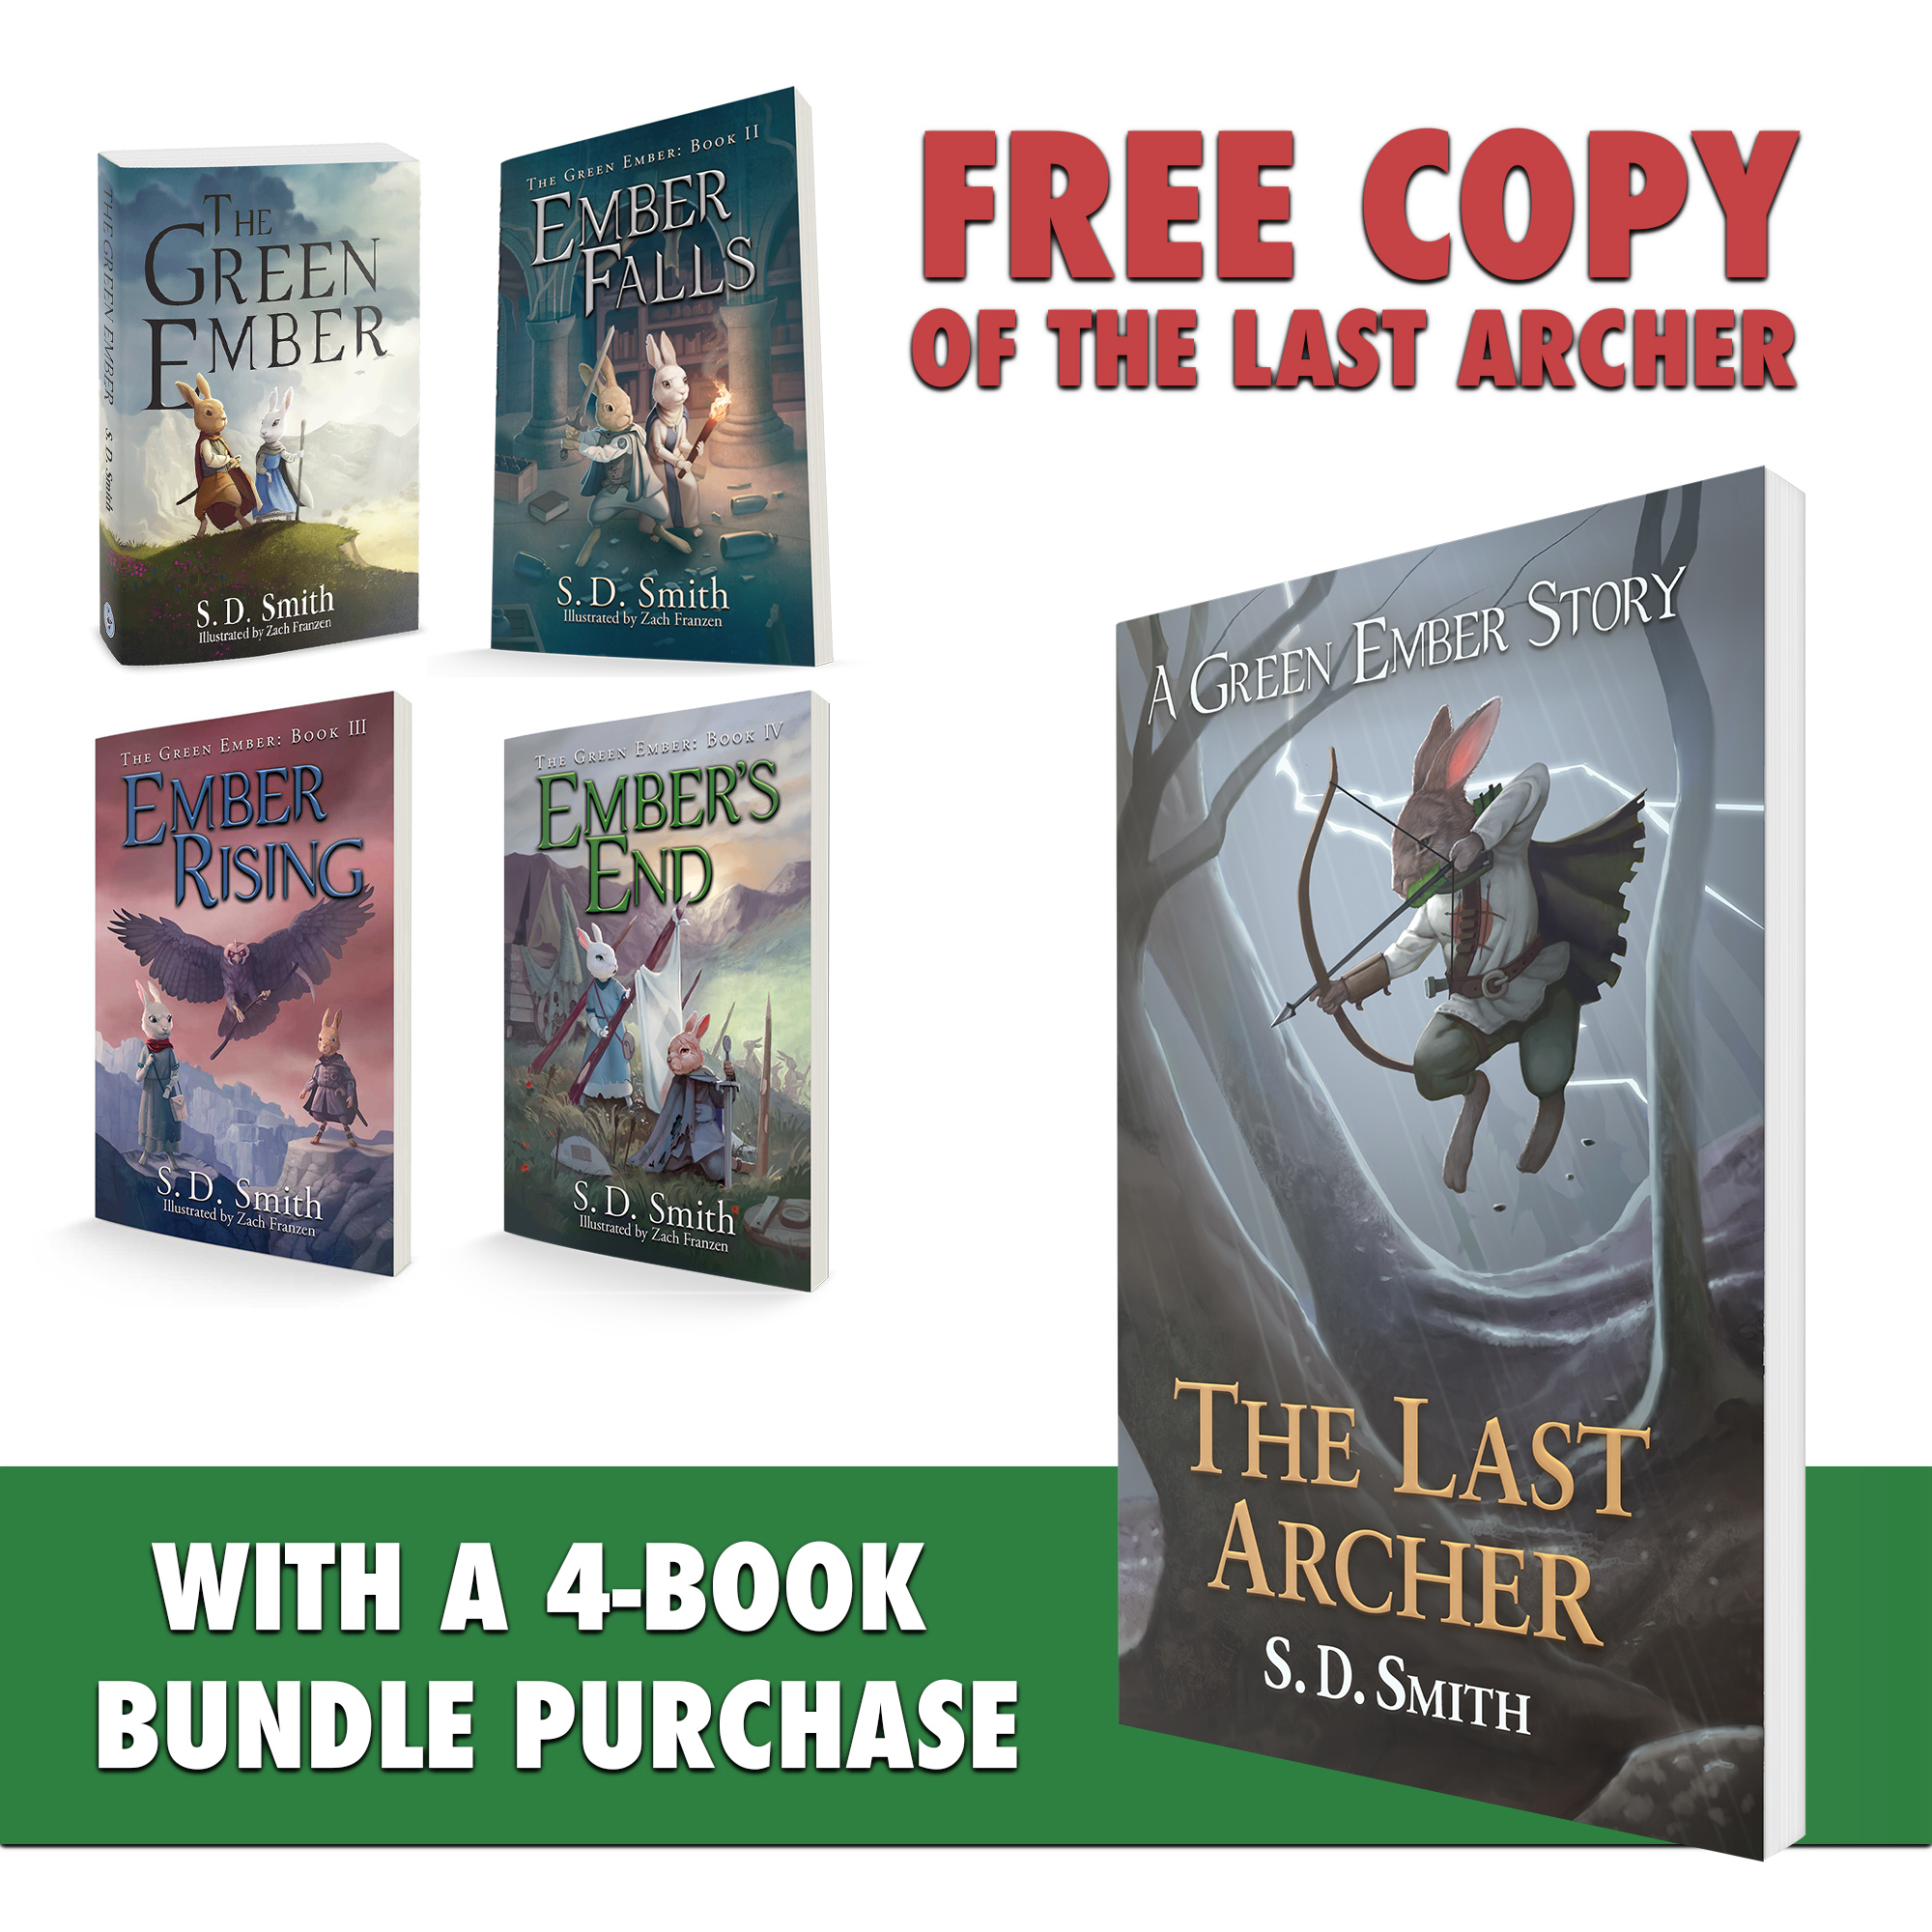 New S. D. Smith Book and Awesome Christmas Deals LAUNCH TODAY!